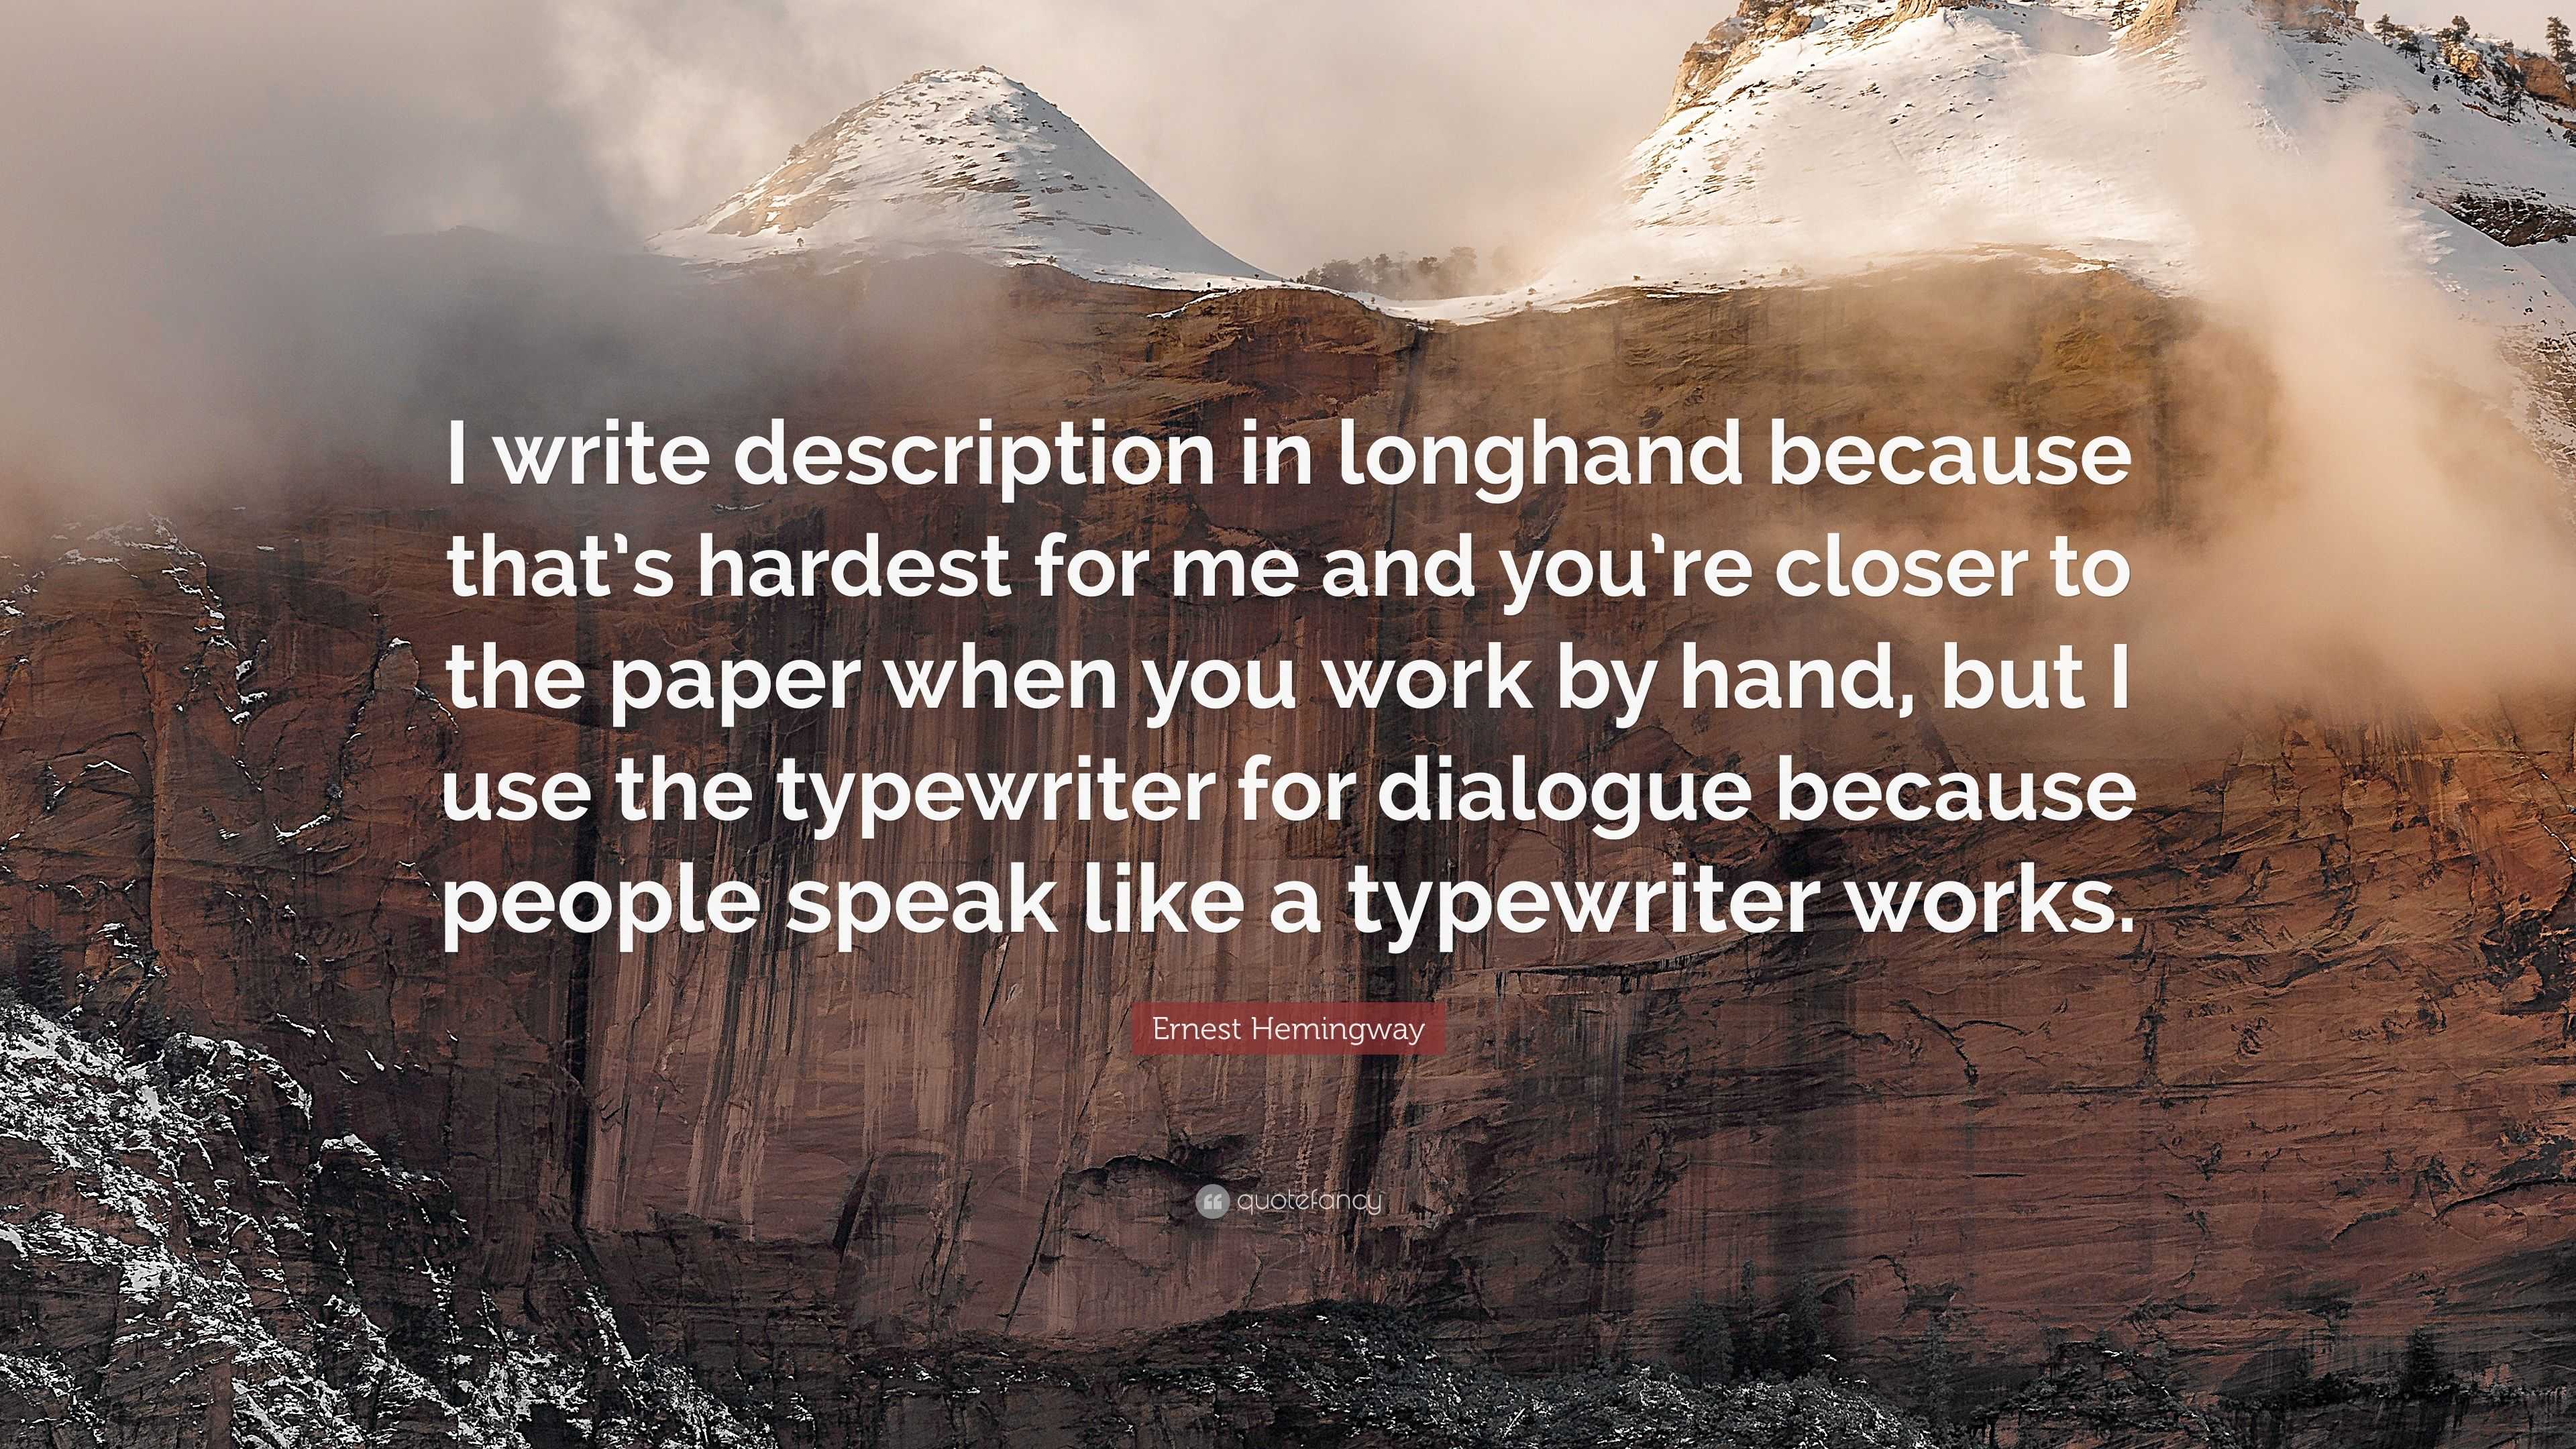 Ernest Hemingway Quote: “I write description in longhand because that’s